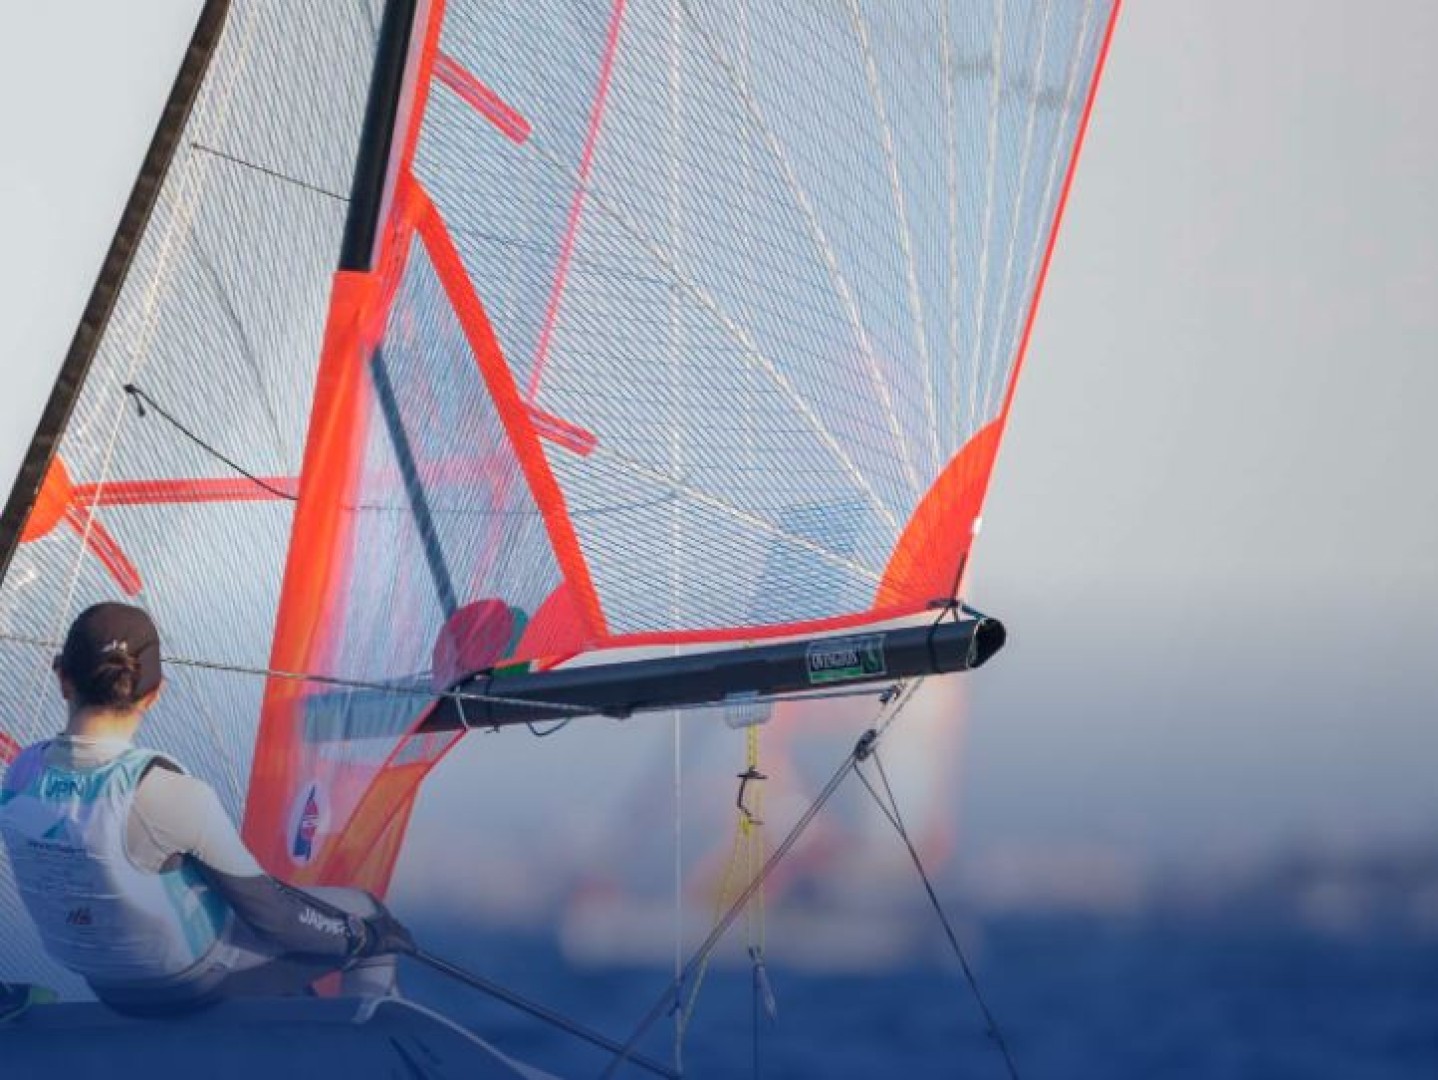 450 sailors ready for the 2022 Youth Sailing World Championships